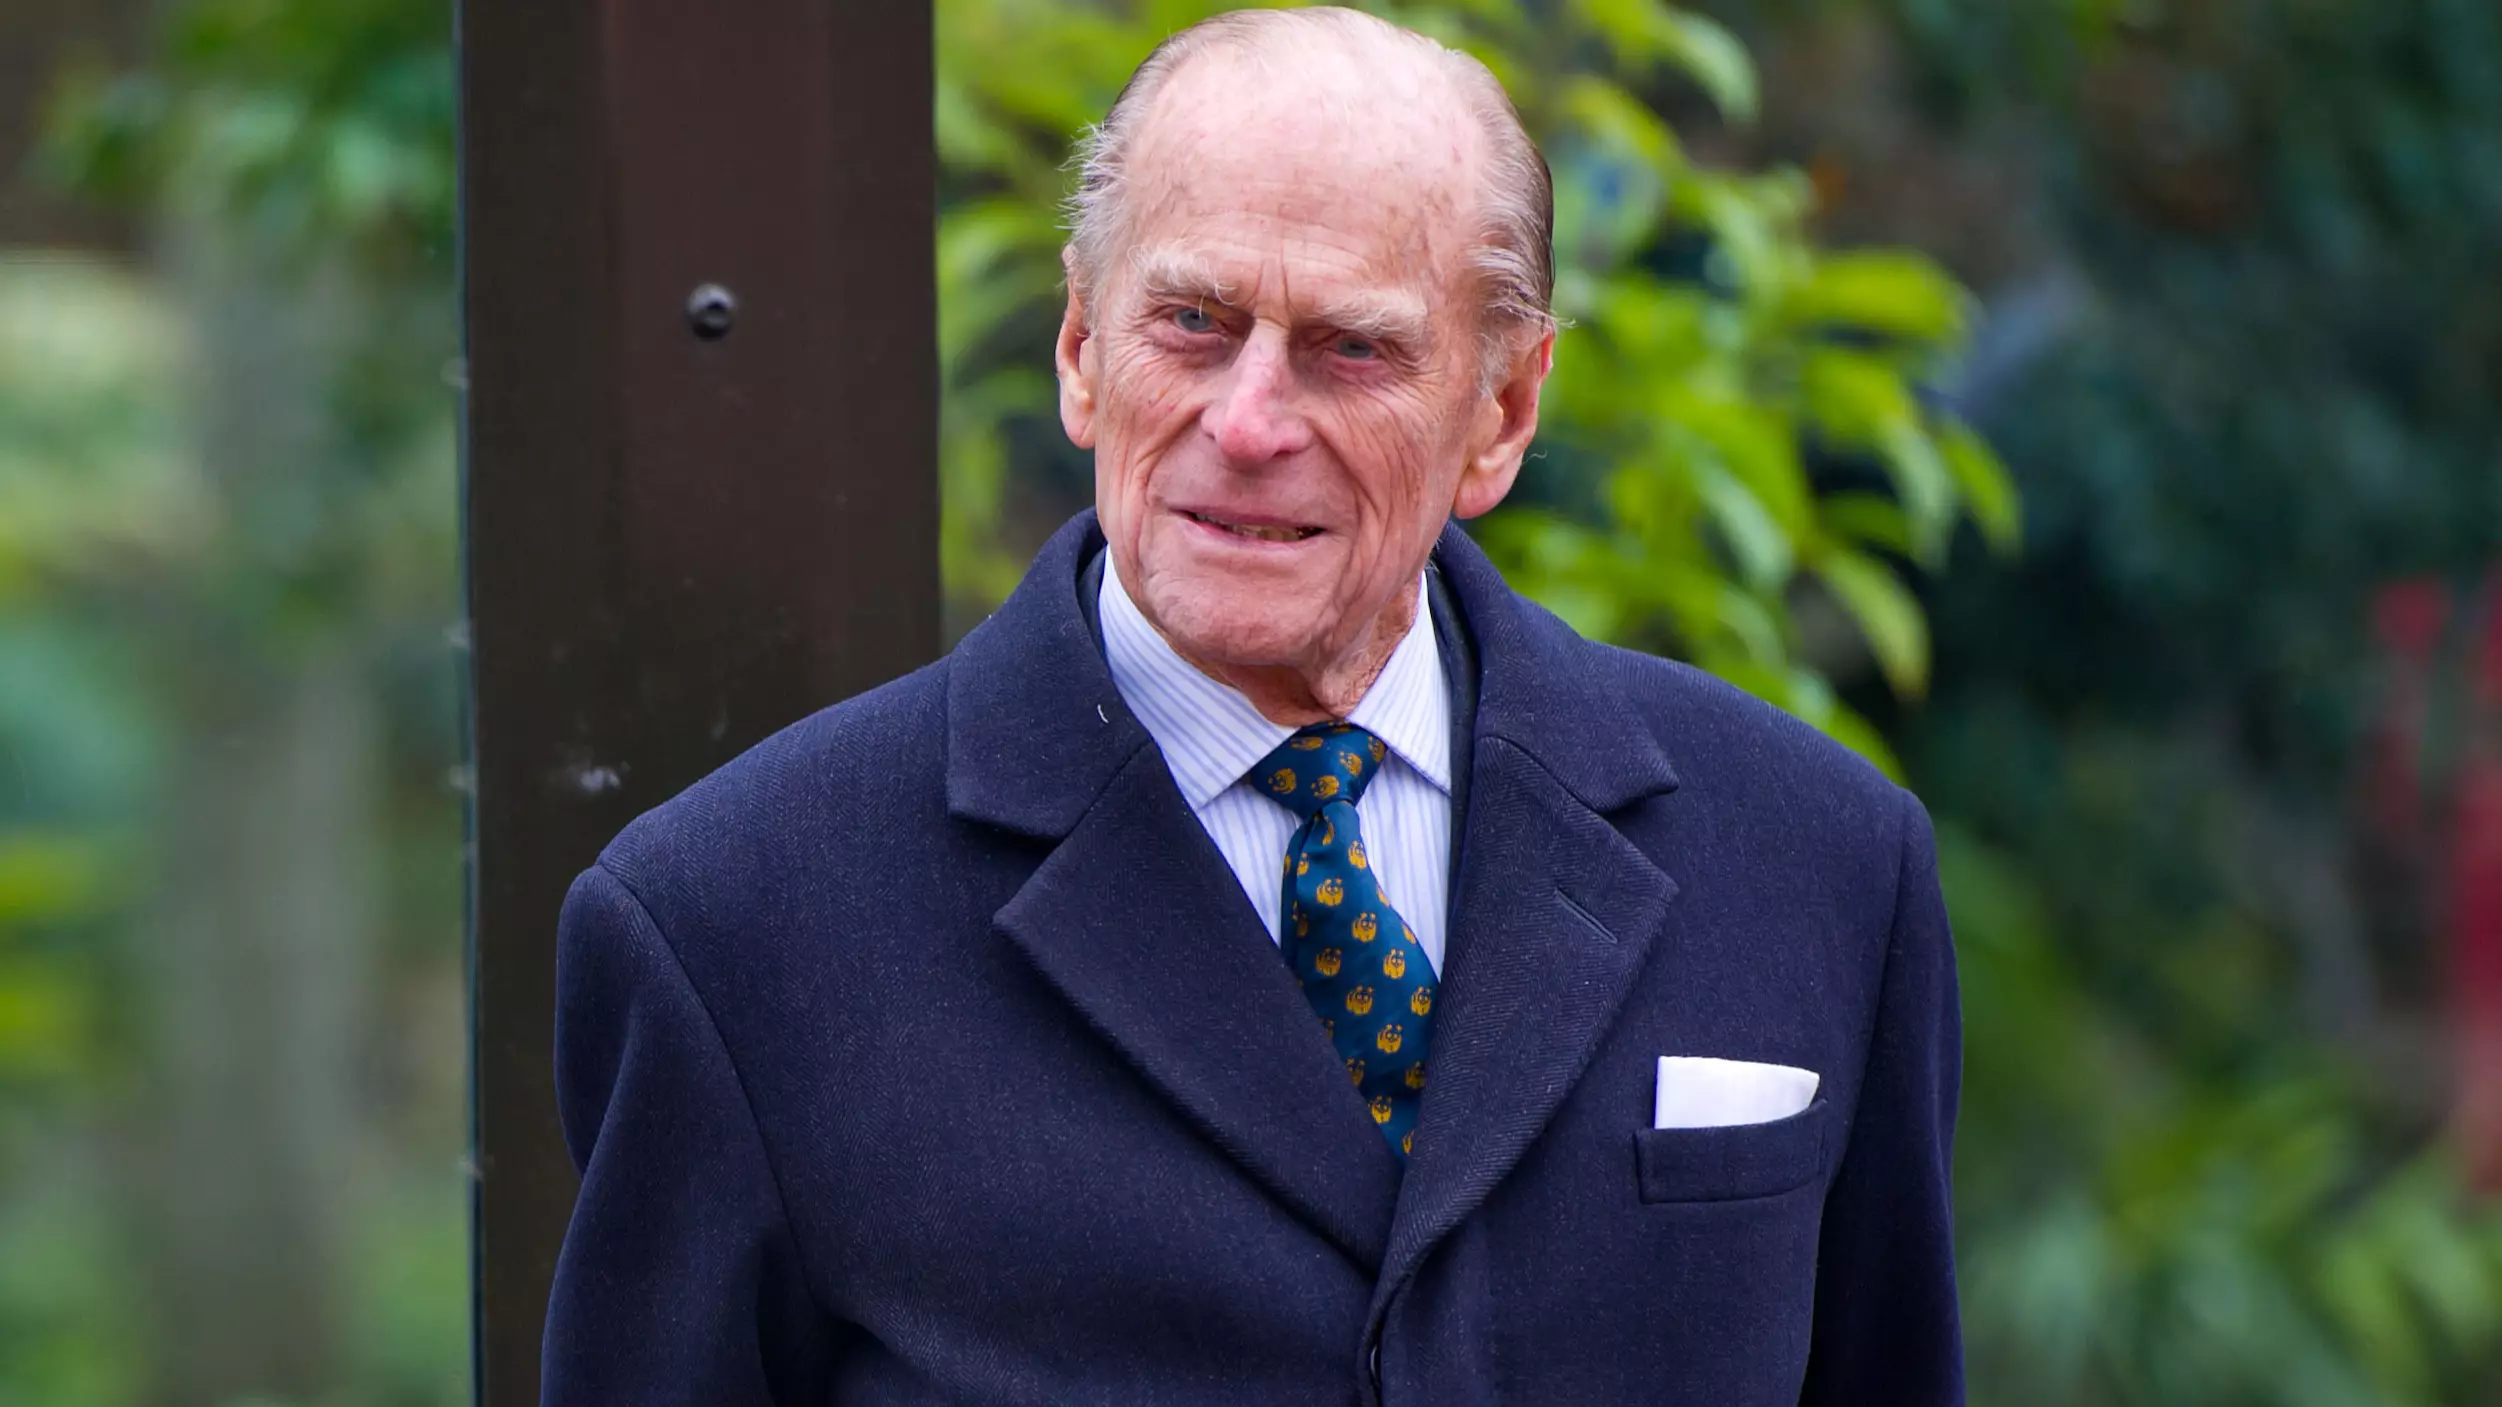 Prince Philip's Funeral To Be Held On 17 April